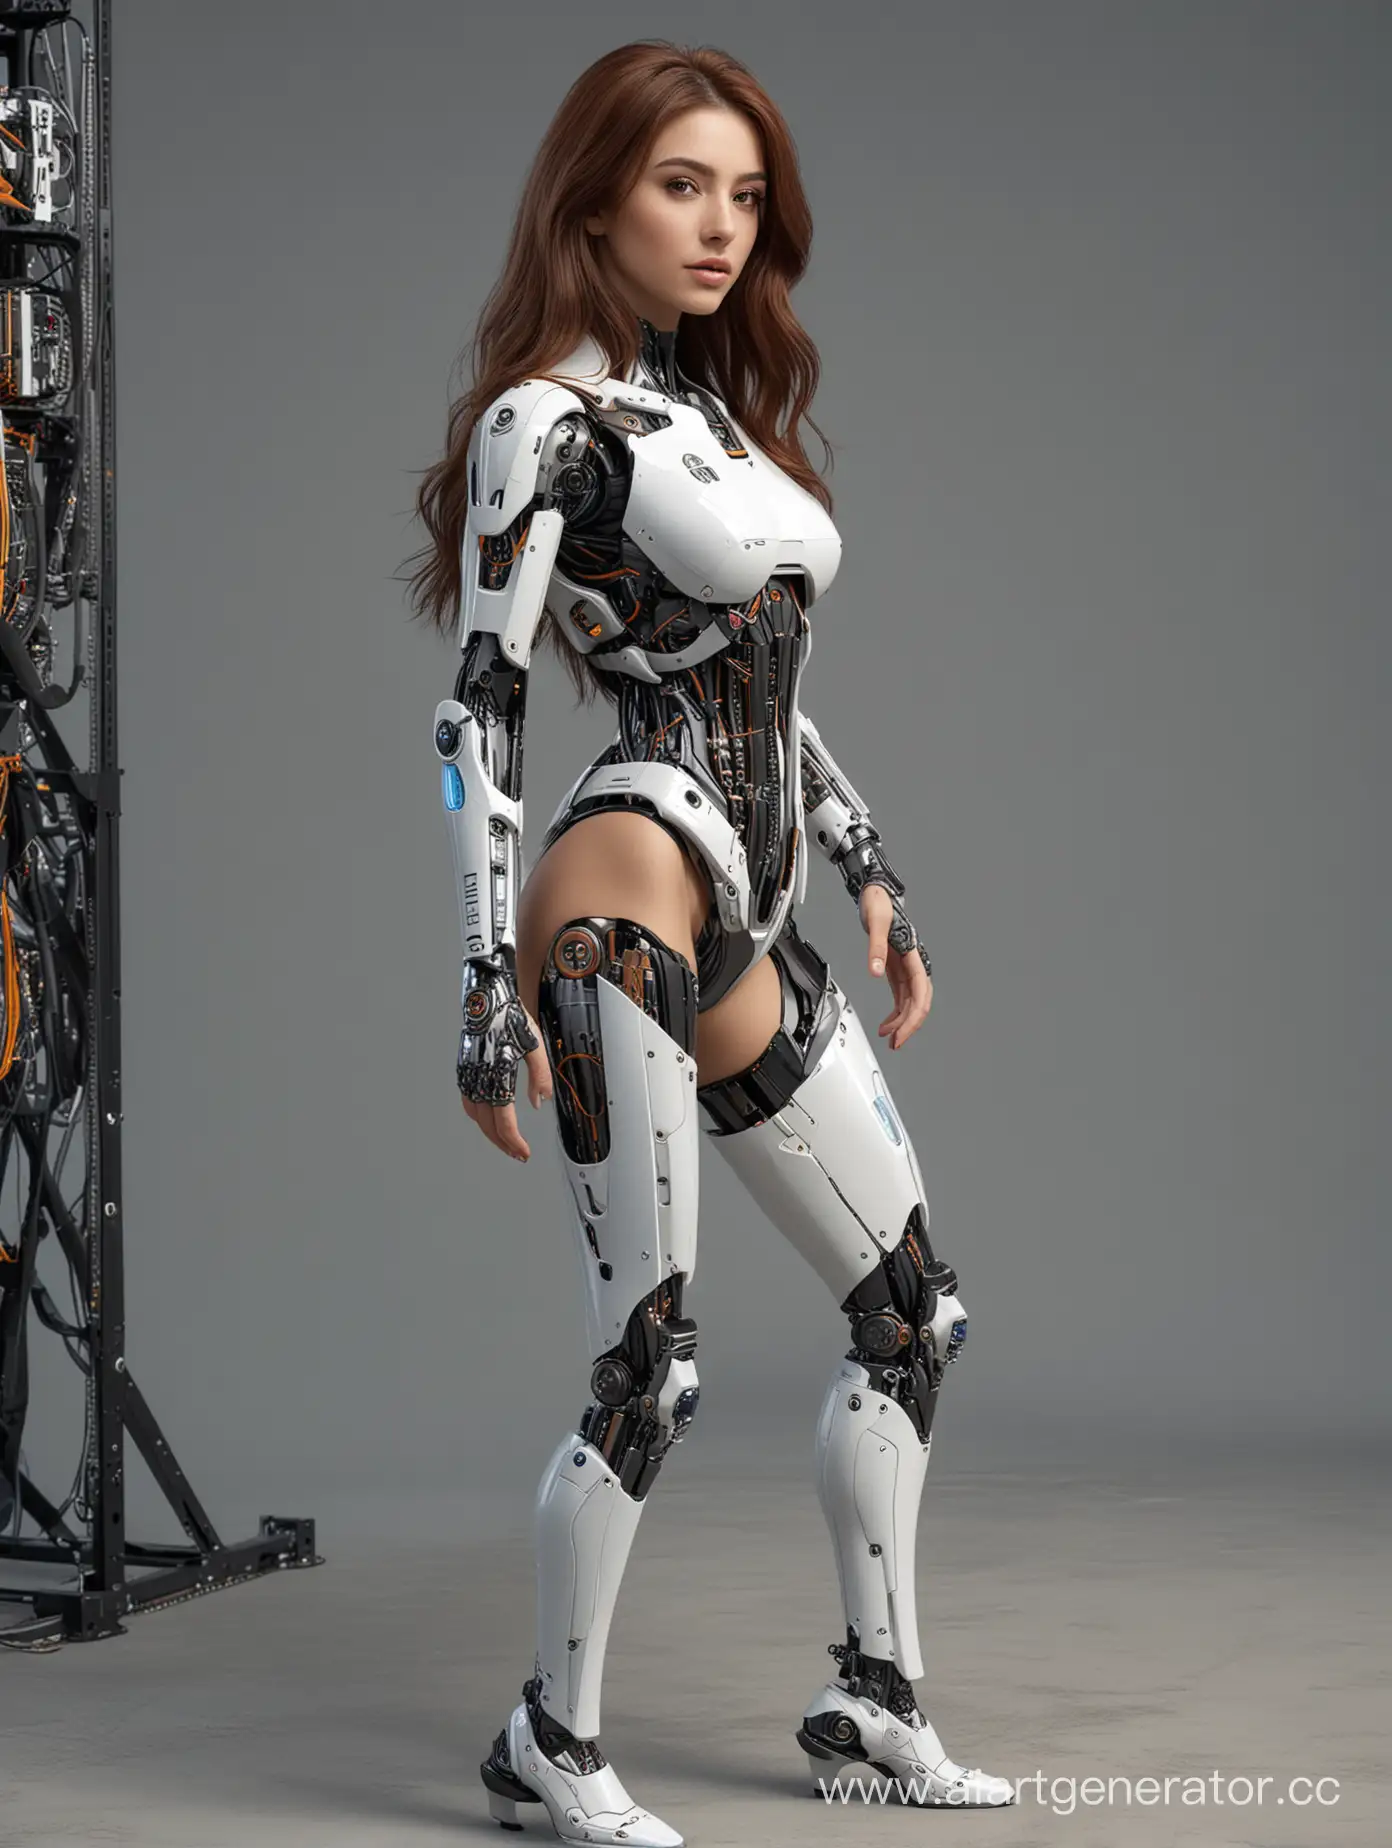 Android, Turkish woman, withroboticknees and calves, long brown hair, Intricate details, 8k, full body, three-quarter view, side boob